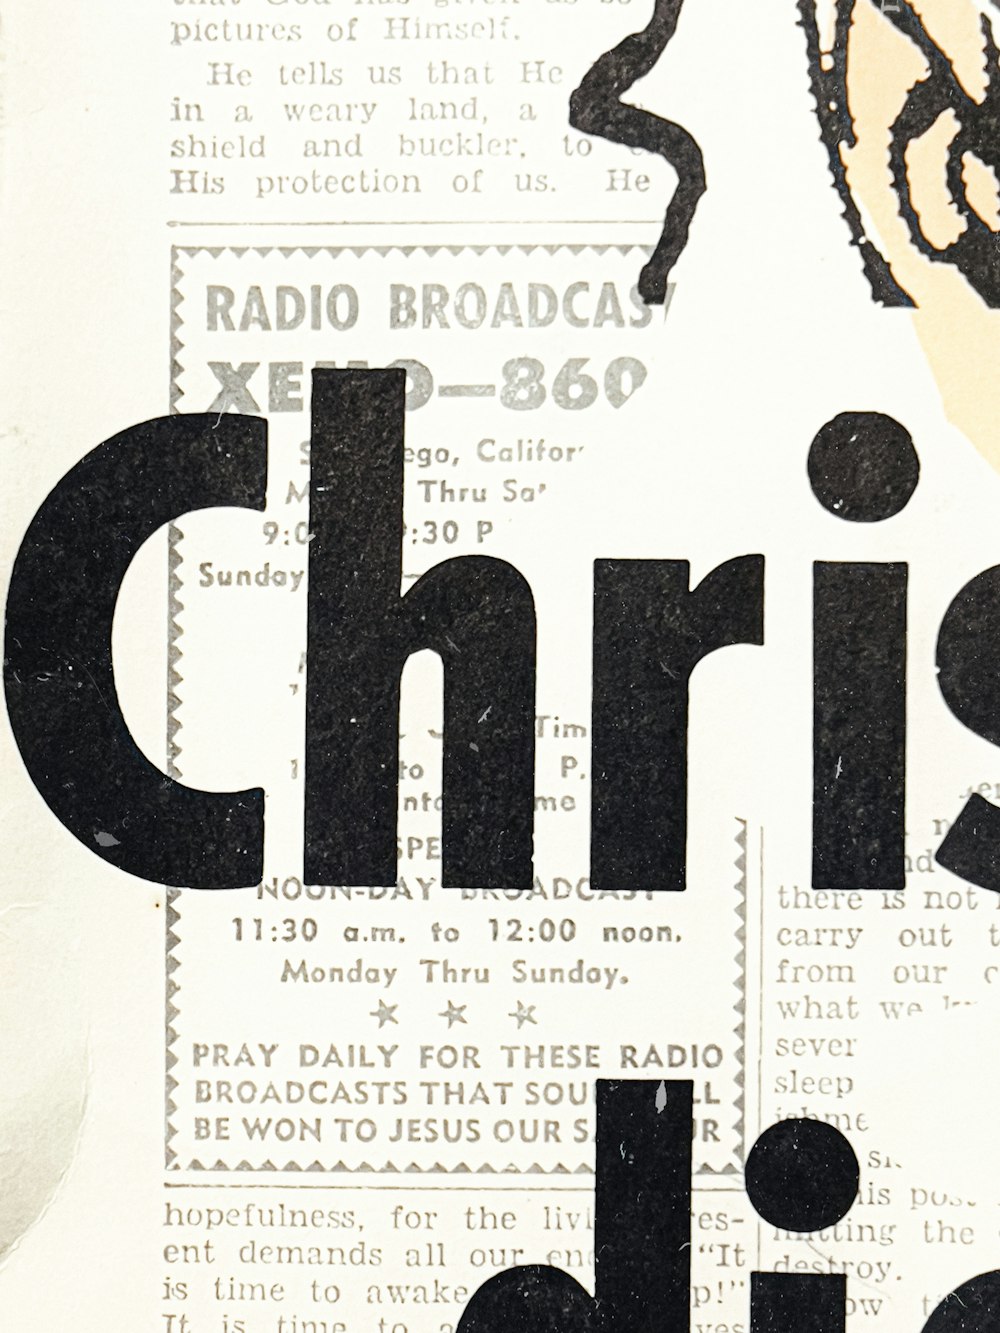 a newspaper advertisement for a radio broadcast